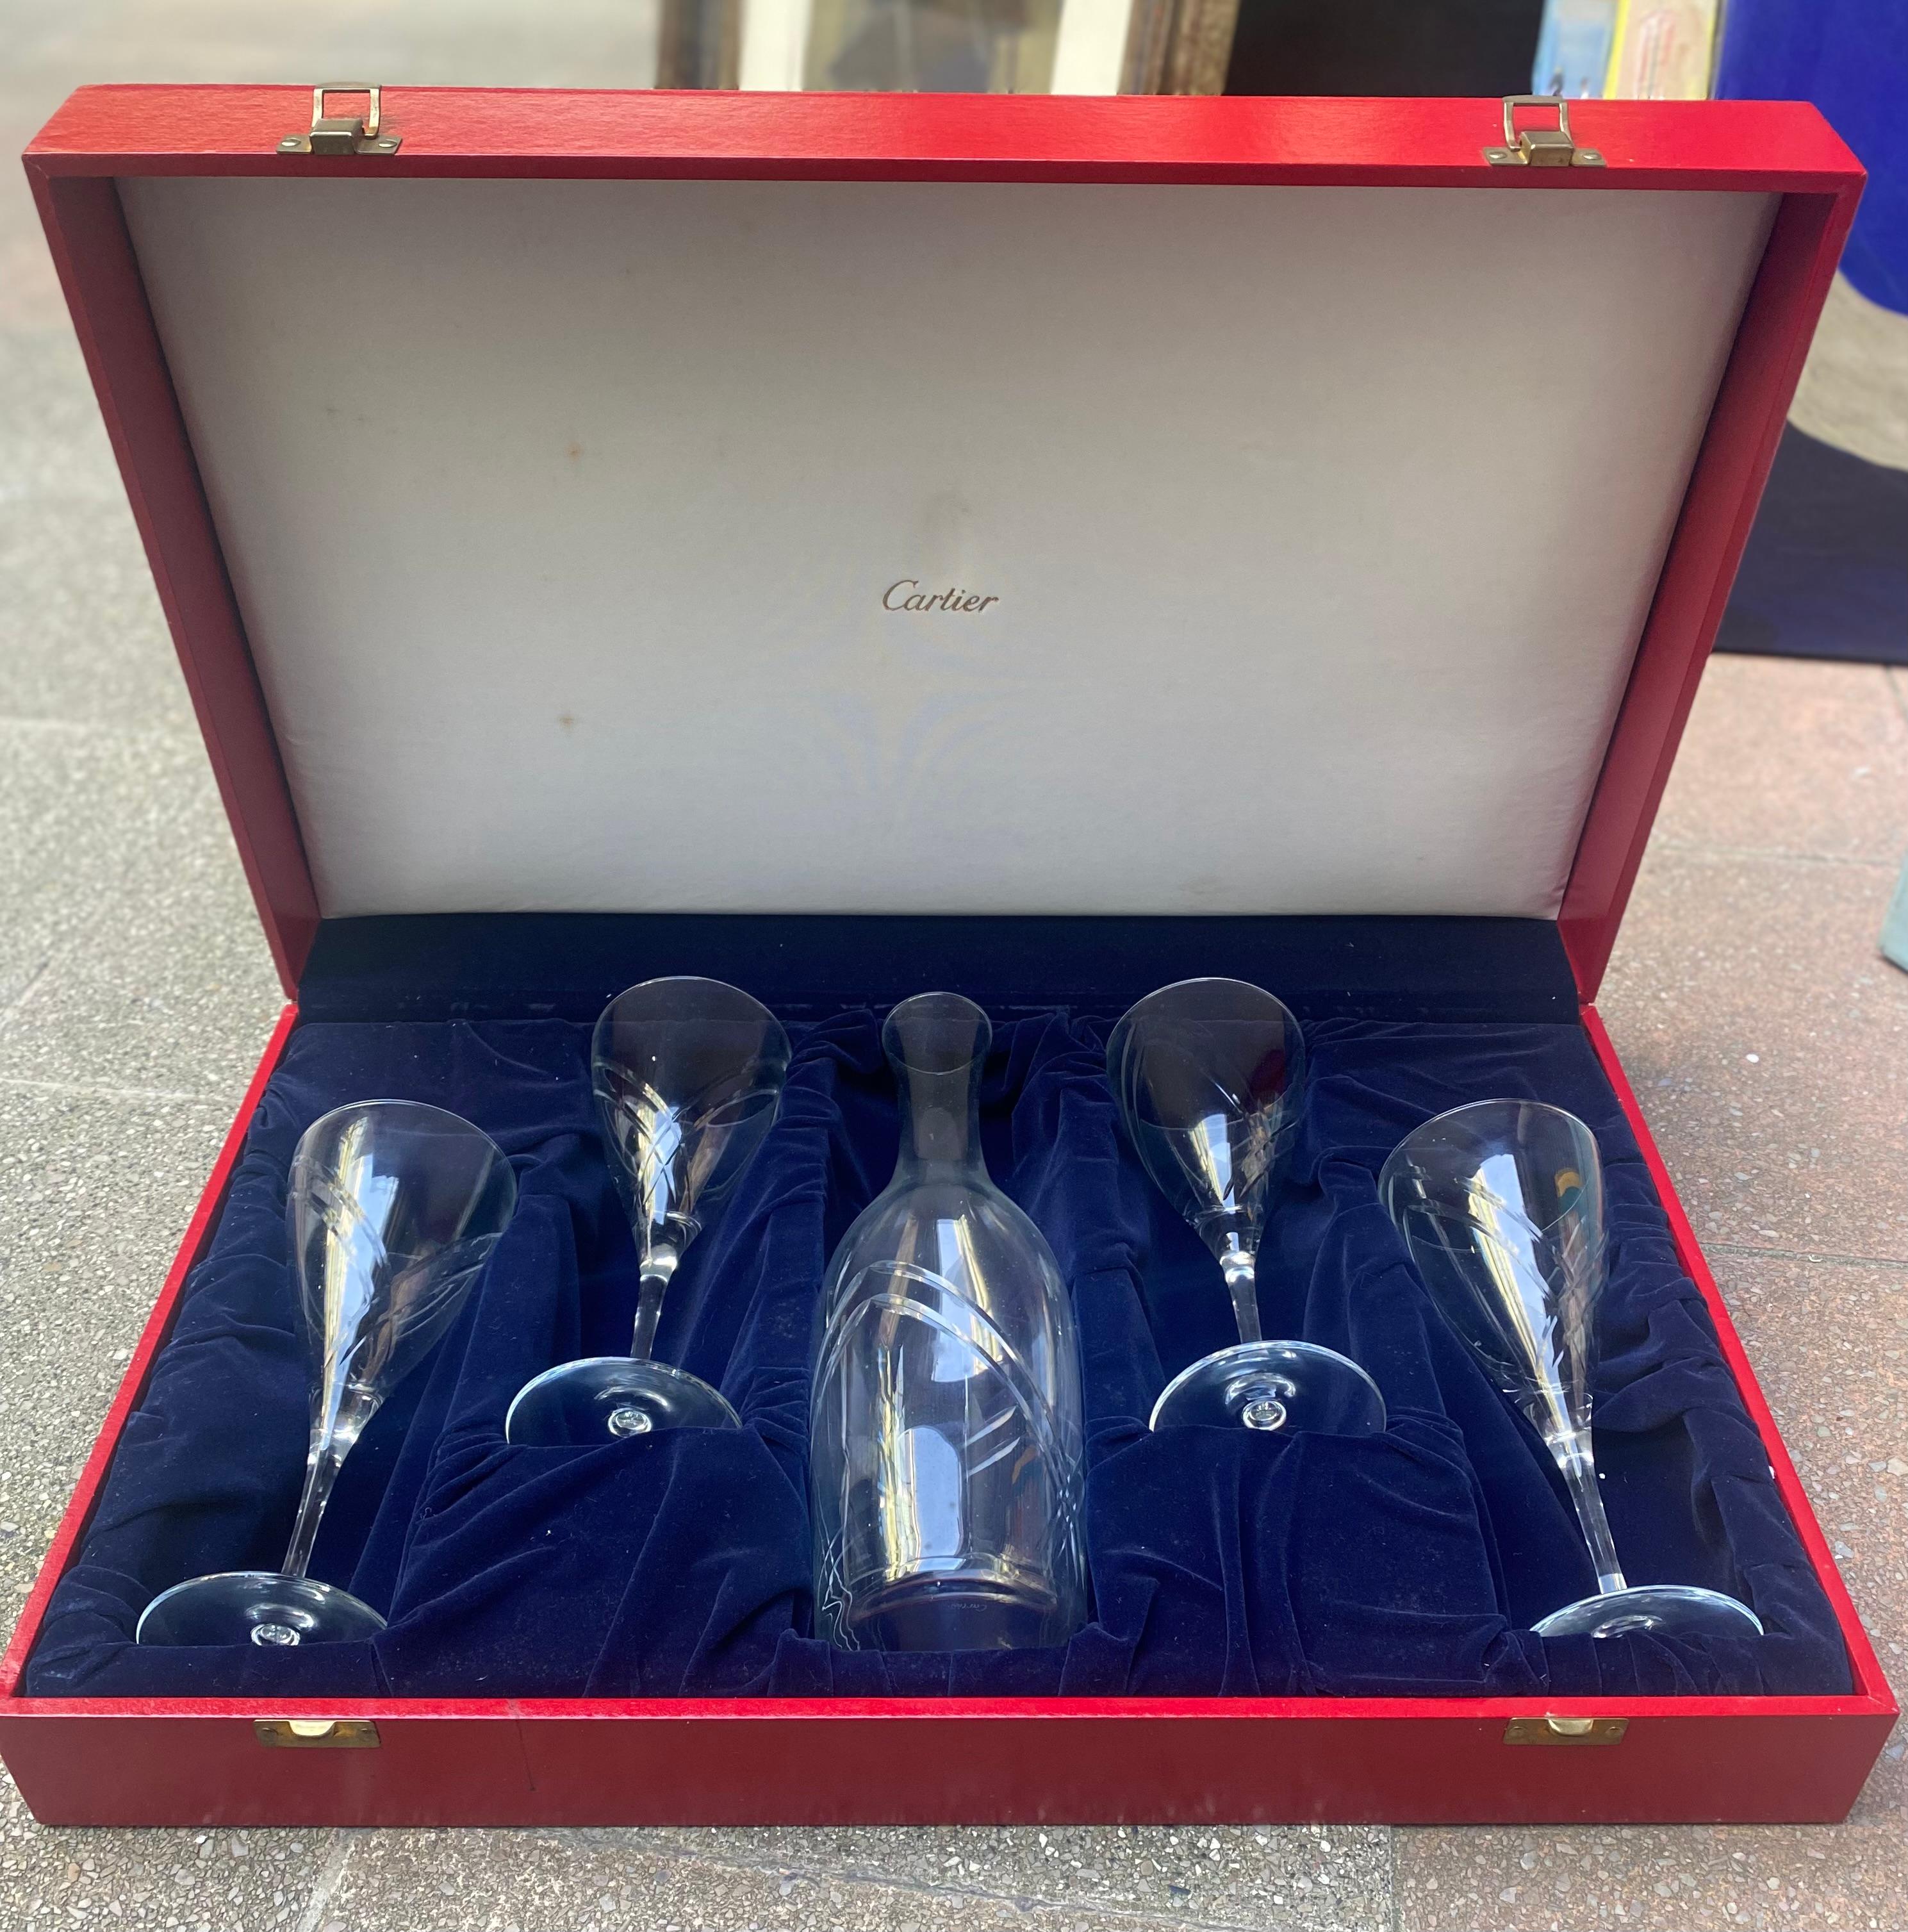 Mid-20th Century Cartier Box Consisting of 4 Water Glasses and a Crystal Water Carafe - 1960s For Sale